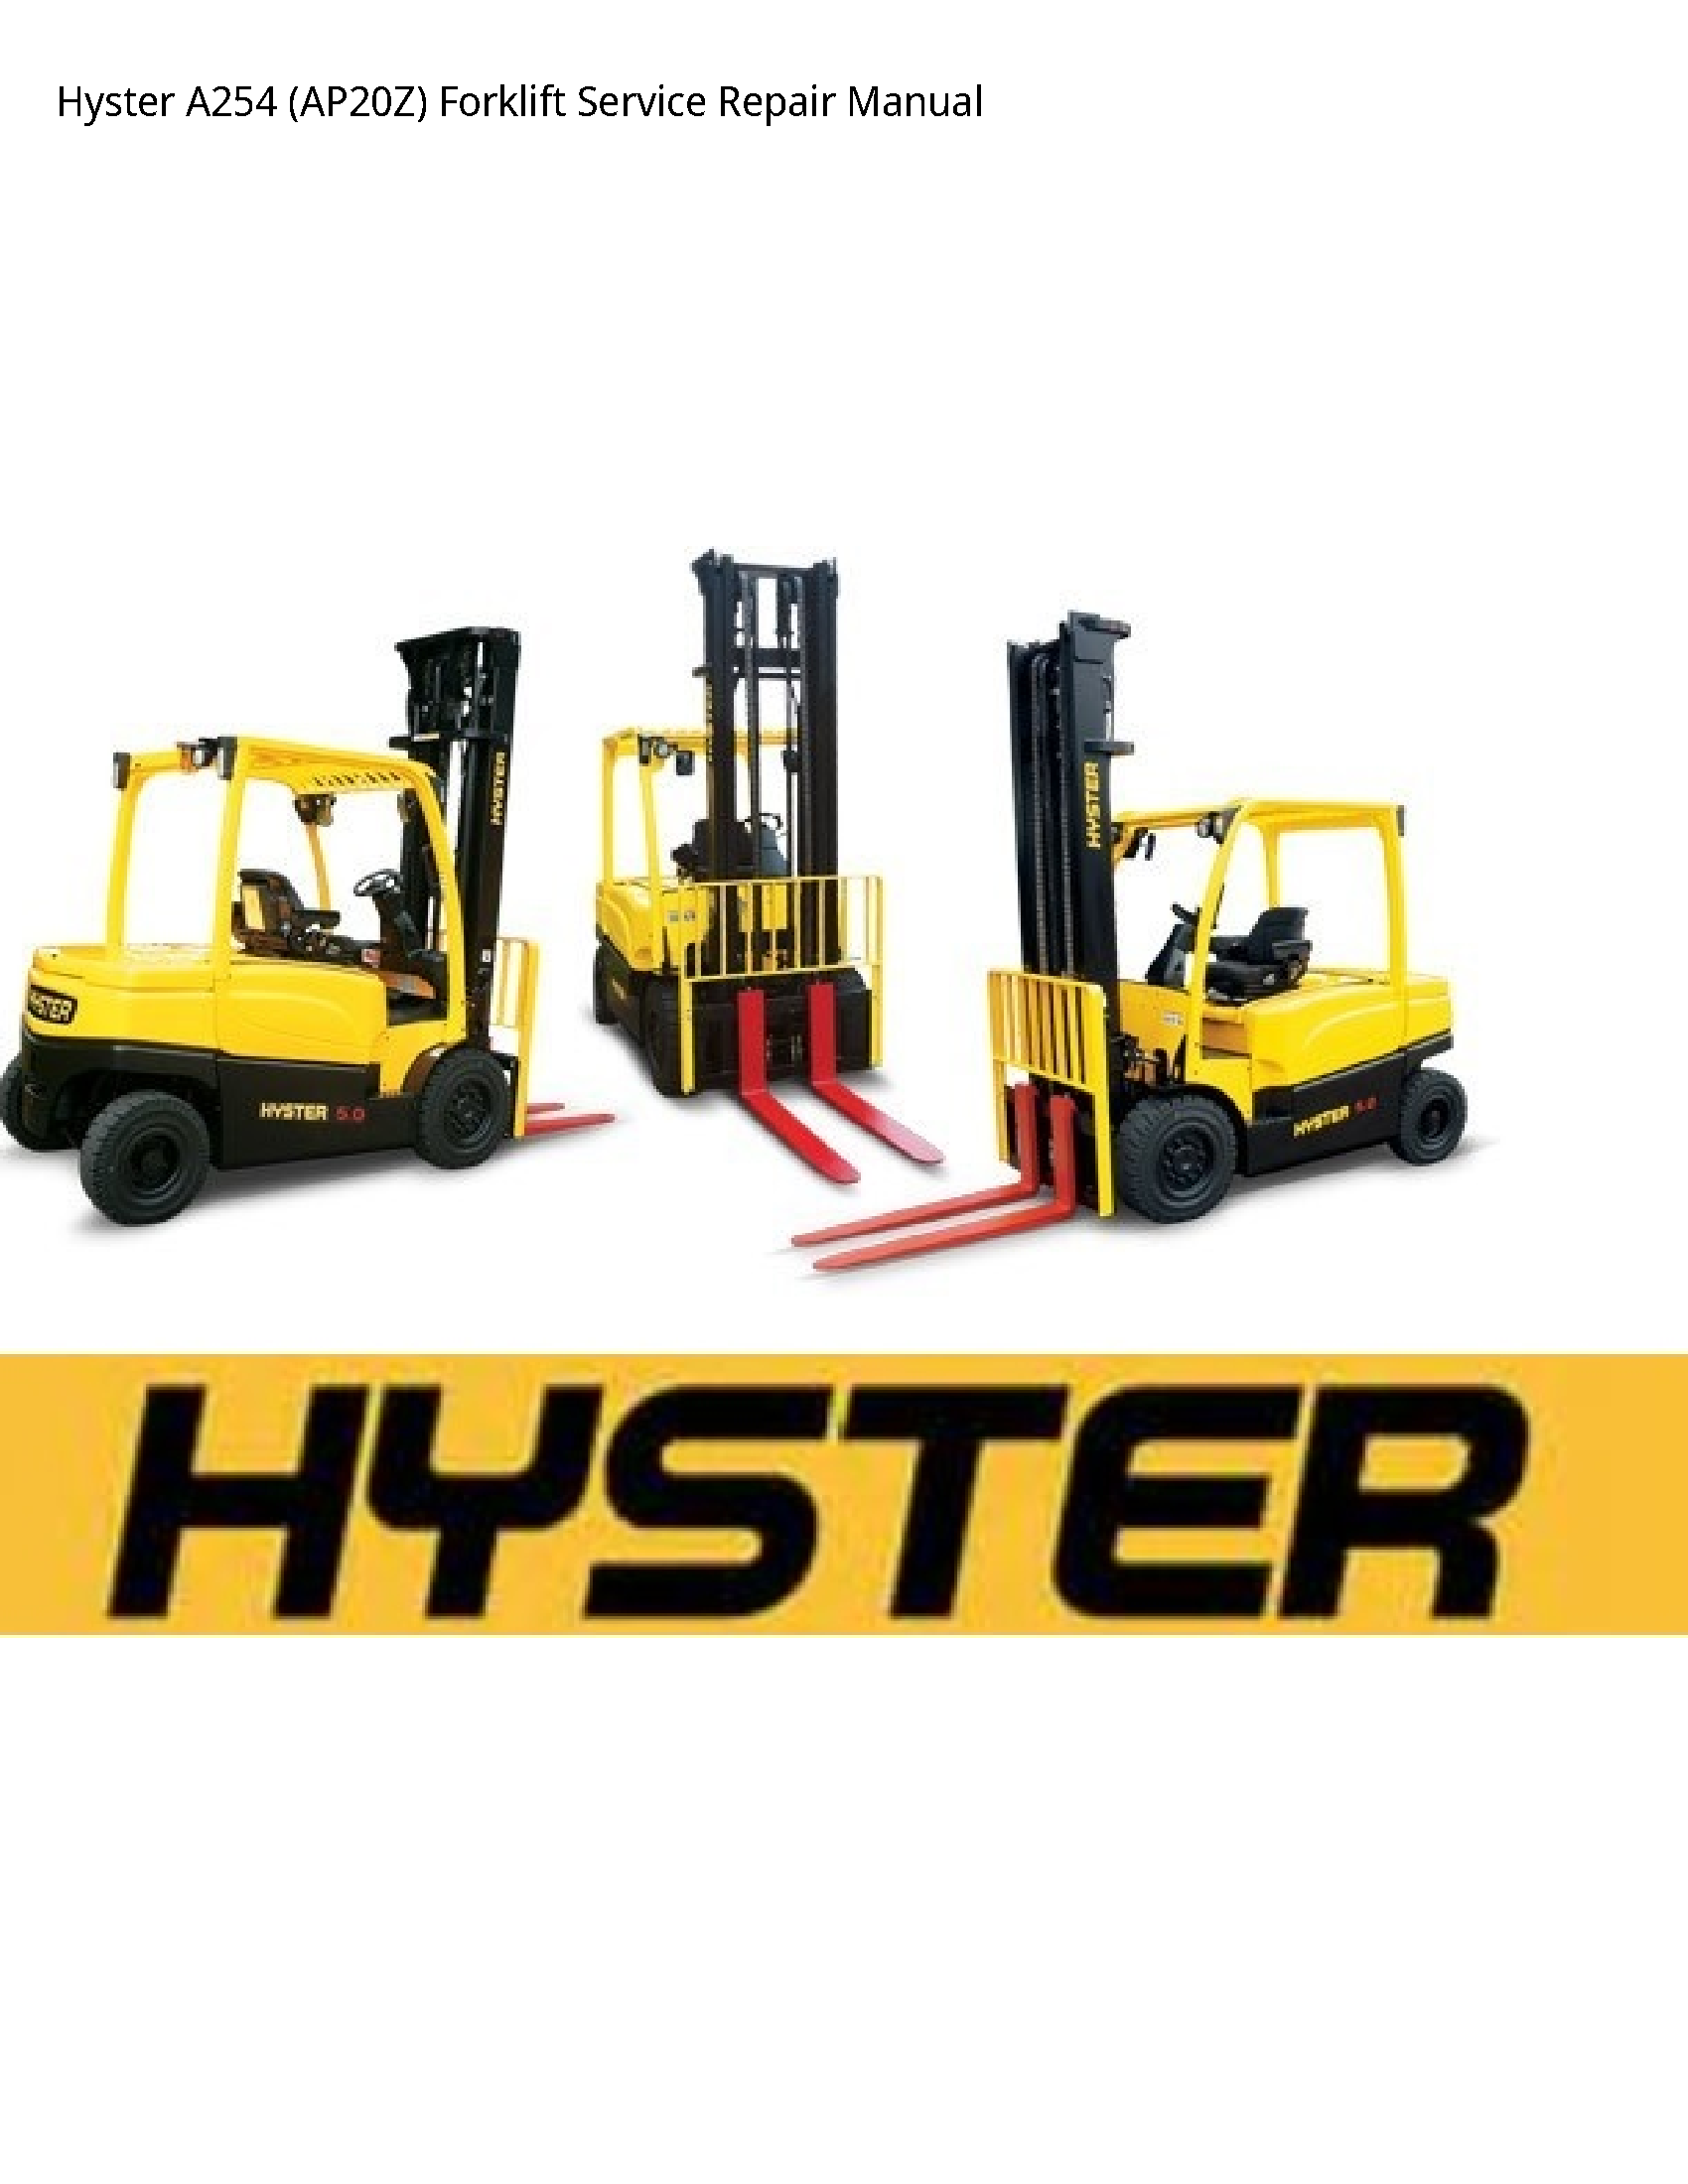 Hyster A254 Forklift manual